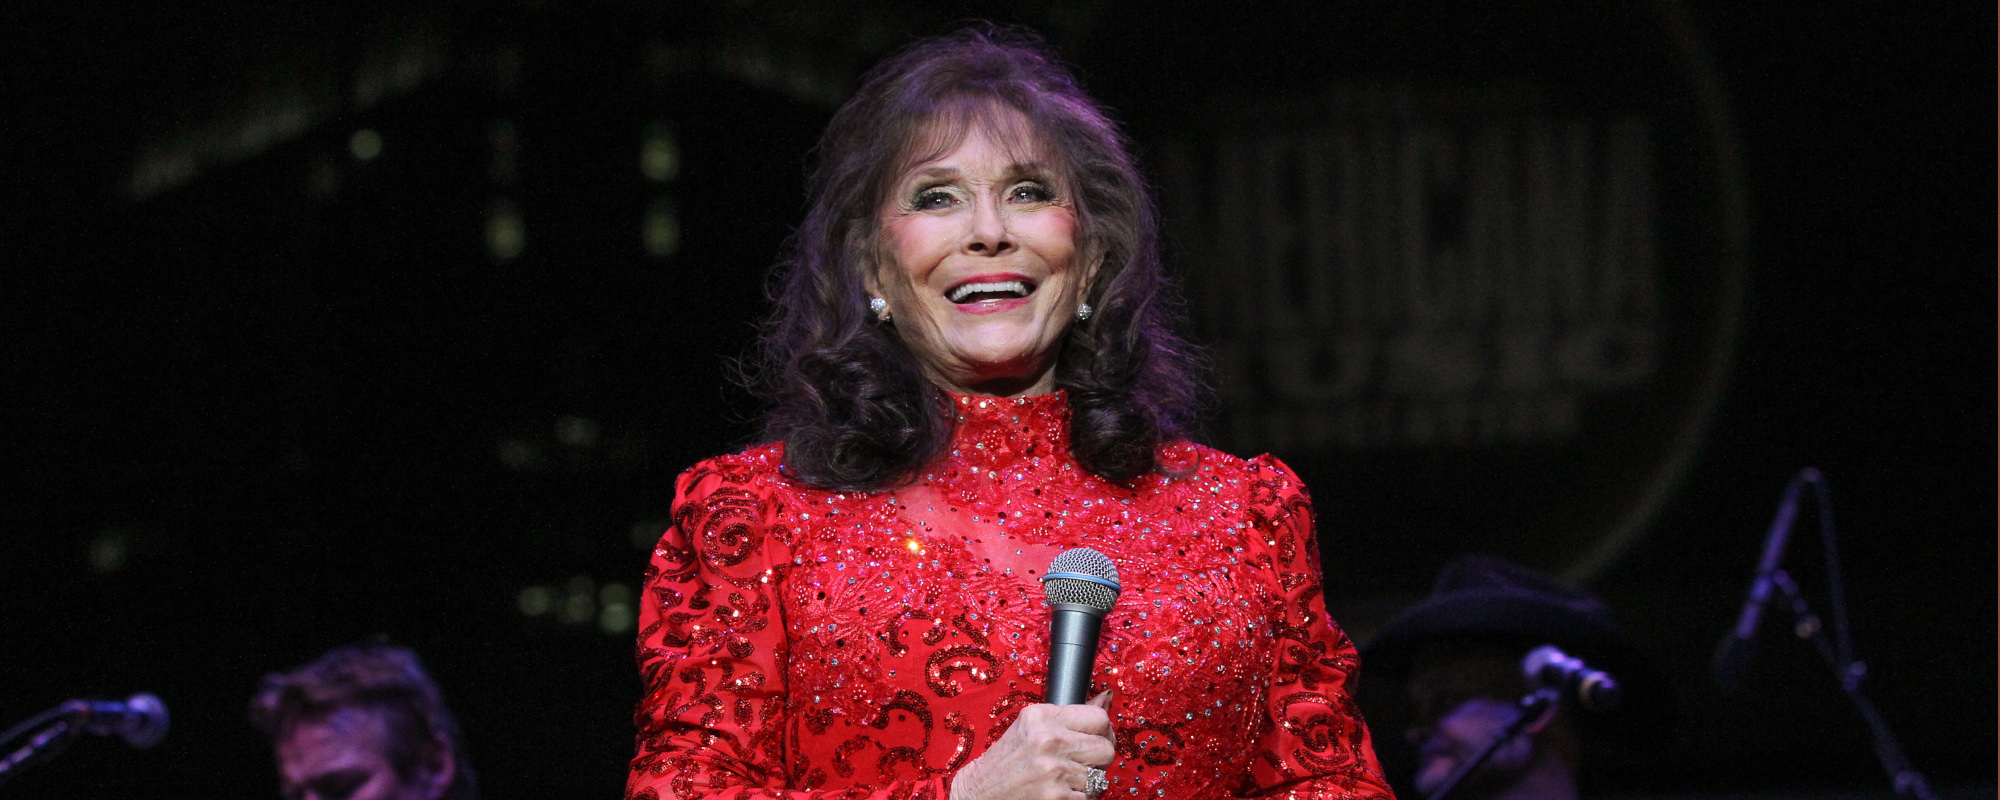 Loretta Lynn’s Family to Release ‘A SONG AND A PRAYER’ by The Queen of Country Music